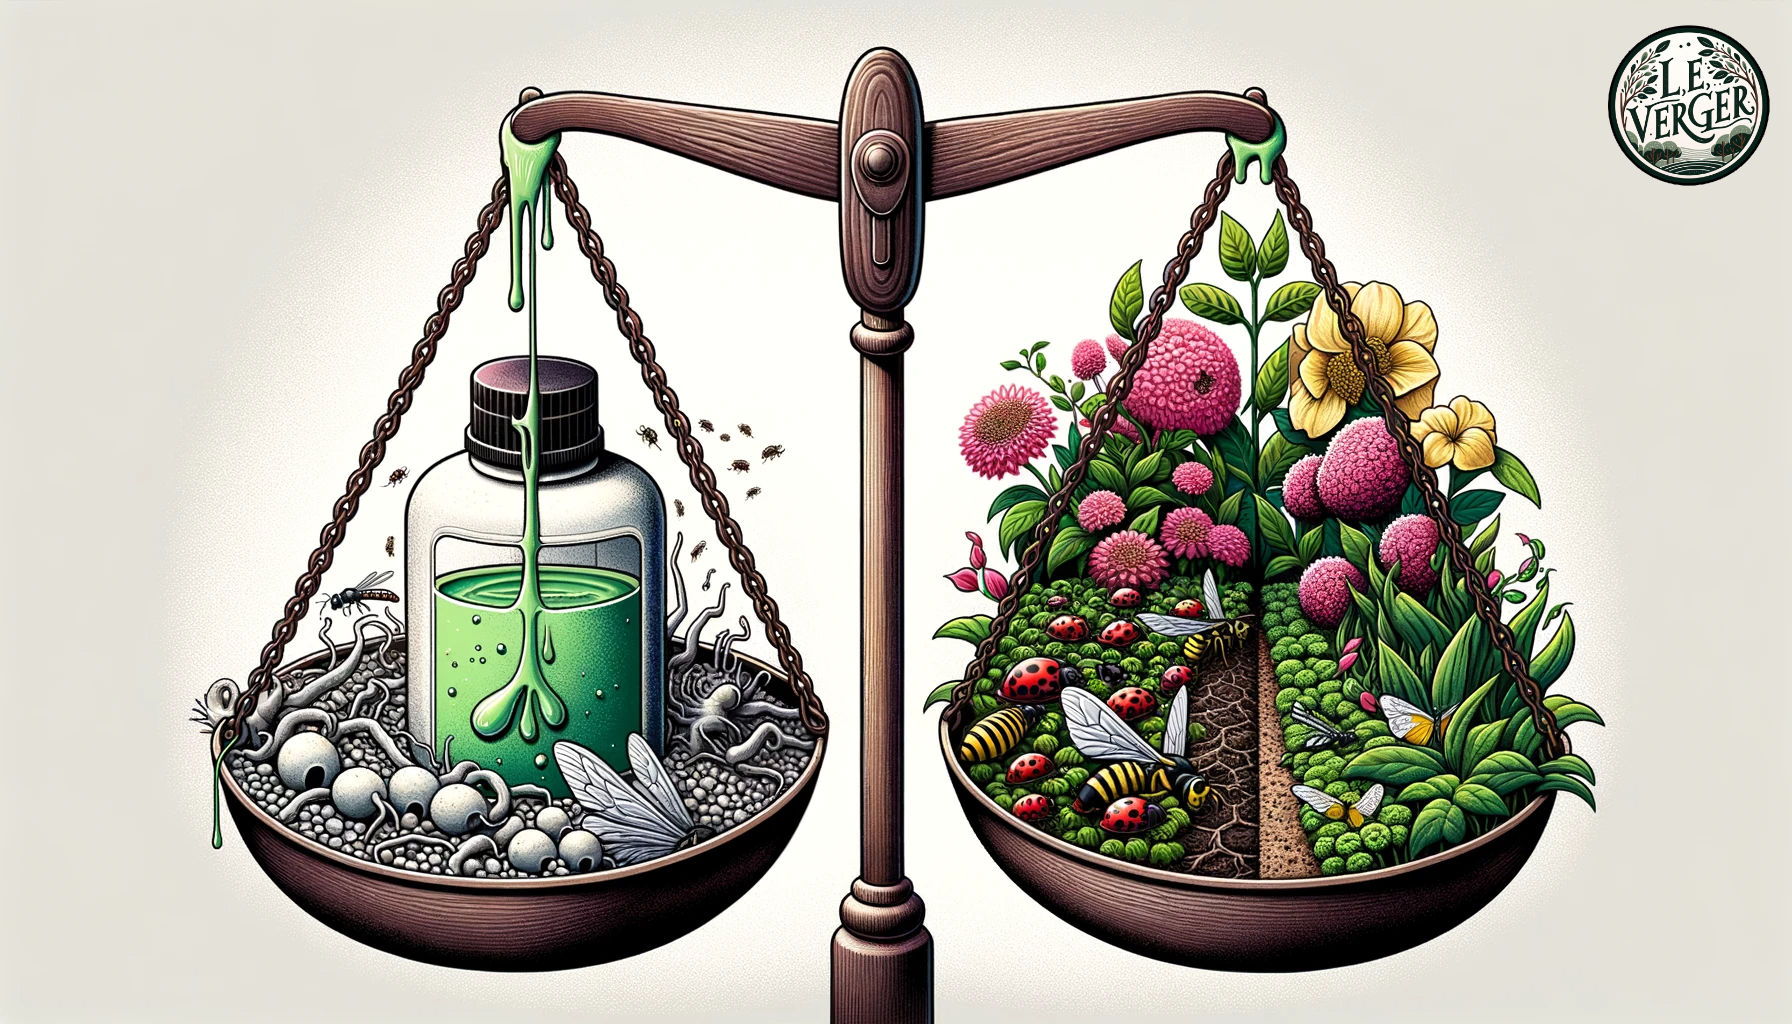 Illustration: A pair of scales. On one side, a pesticide bottle leaks its content, causing the surrounding environment to turn grey and lifeless, with fallen insects and drooping plants. On the other side, a healthy garden blooms, with various beneficial insects and vibrant plants, symbolising organic methods.